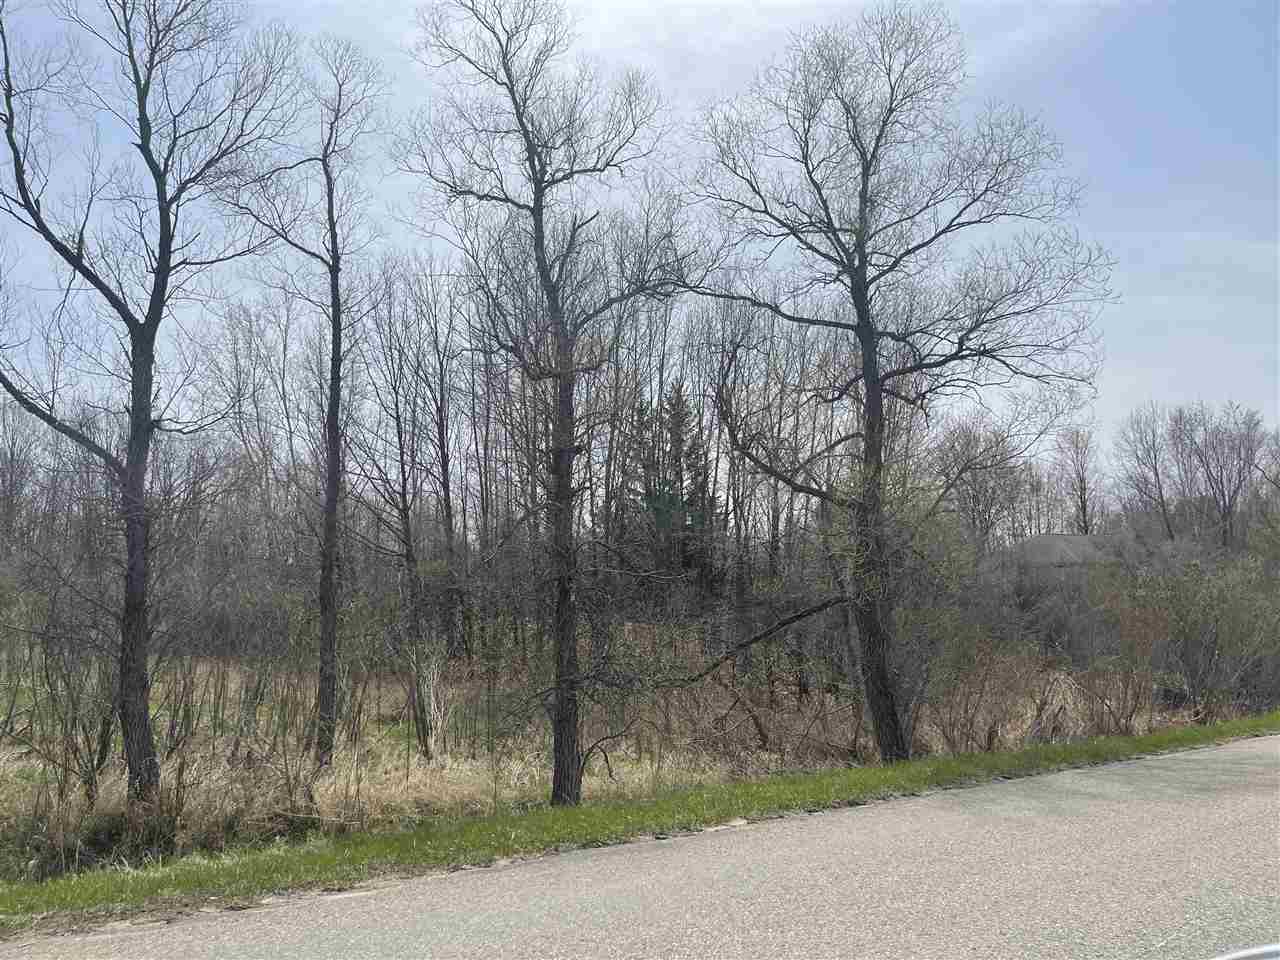 Nice size lot for building or camping.   Just under 1/2 acre that backs up to commons and private land.   Back of lot has path to Lake Lancer.  walkable to Lake Lancelot and Lake Lancer beach clubs for rental docks.  Close distance to Islanders Beach club for playground, pavilion, sandy beach, bath house and more.    Islanders Way is also knows as "Lake Circle Trail"   which is a biking/walk way that goes around Lake Lancelot with beautiful view of waterfront and landscape.   Ownership provides access to an 18 hole golf course , restaurant/pub, fitness center, indoor heated pool, tennis/bocce ball courts, chalet/sledding hill, walking (nature) trails, activity bldg, storage area, 2 all sports lakes, Lk Lancer/Lancelot, 15 beach clubs (5 with beach/bath house). Or fly to/from Sugar Springs off a 3500ft well maintained grass airpark.   www.airnav.com   5M6.    ALL just 2-1/2 hours from Detroit!